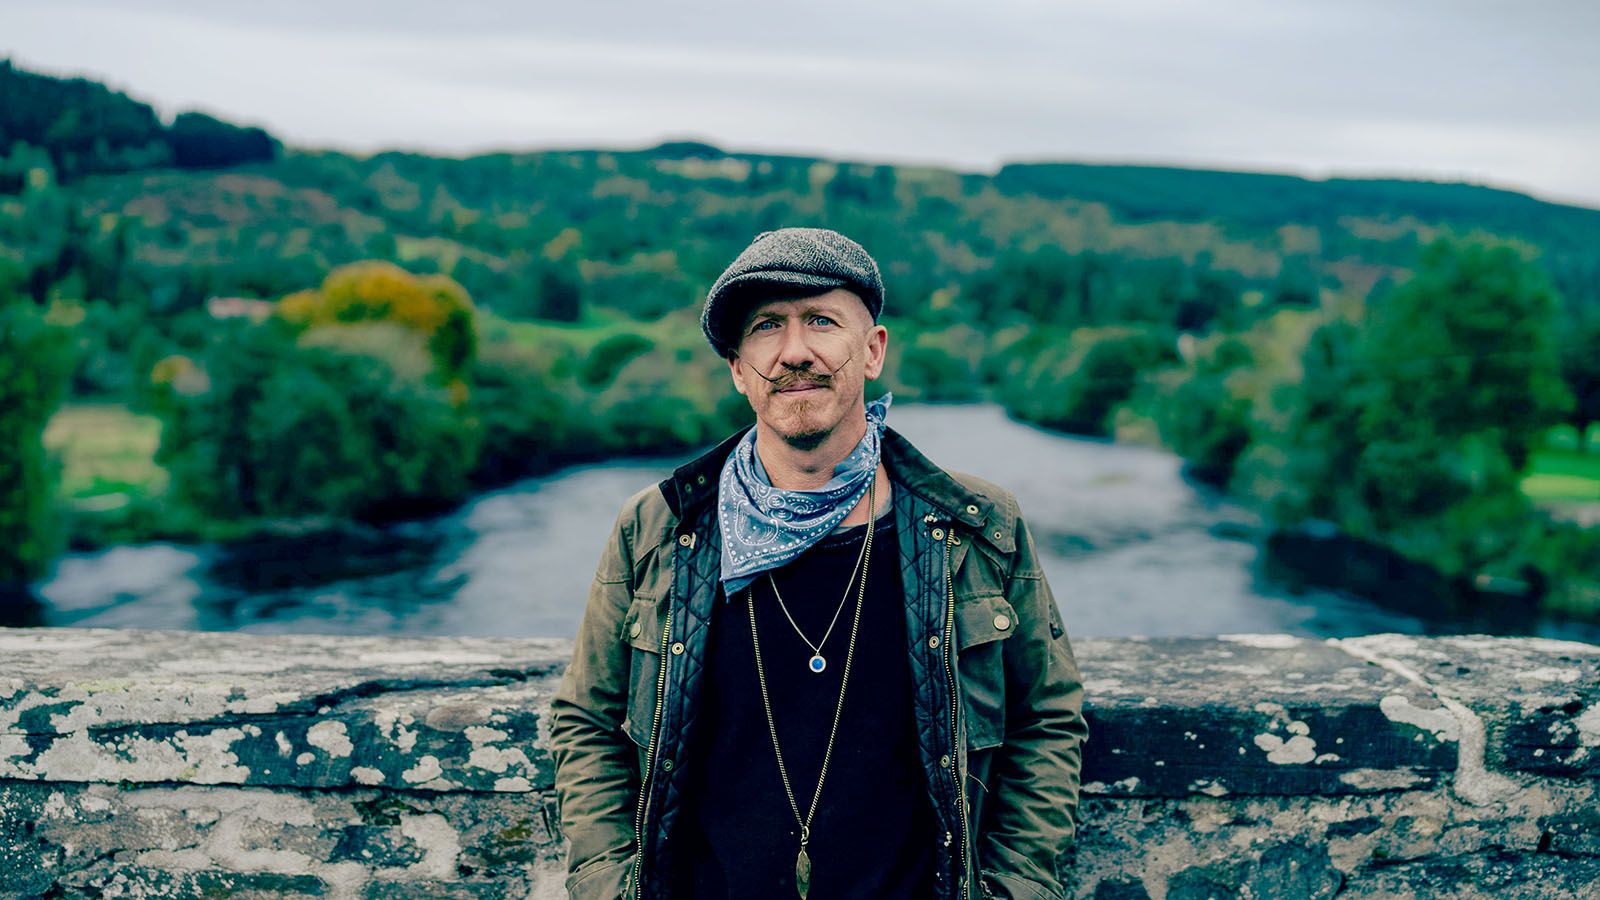 Singer-songwriter Foy Vance of Northern Ireland will bring his Regarding the Joy of Nothing Tour to The Clyde Theatre on Sunday, Jan. 28.